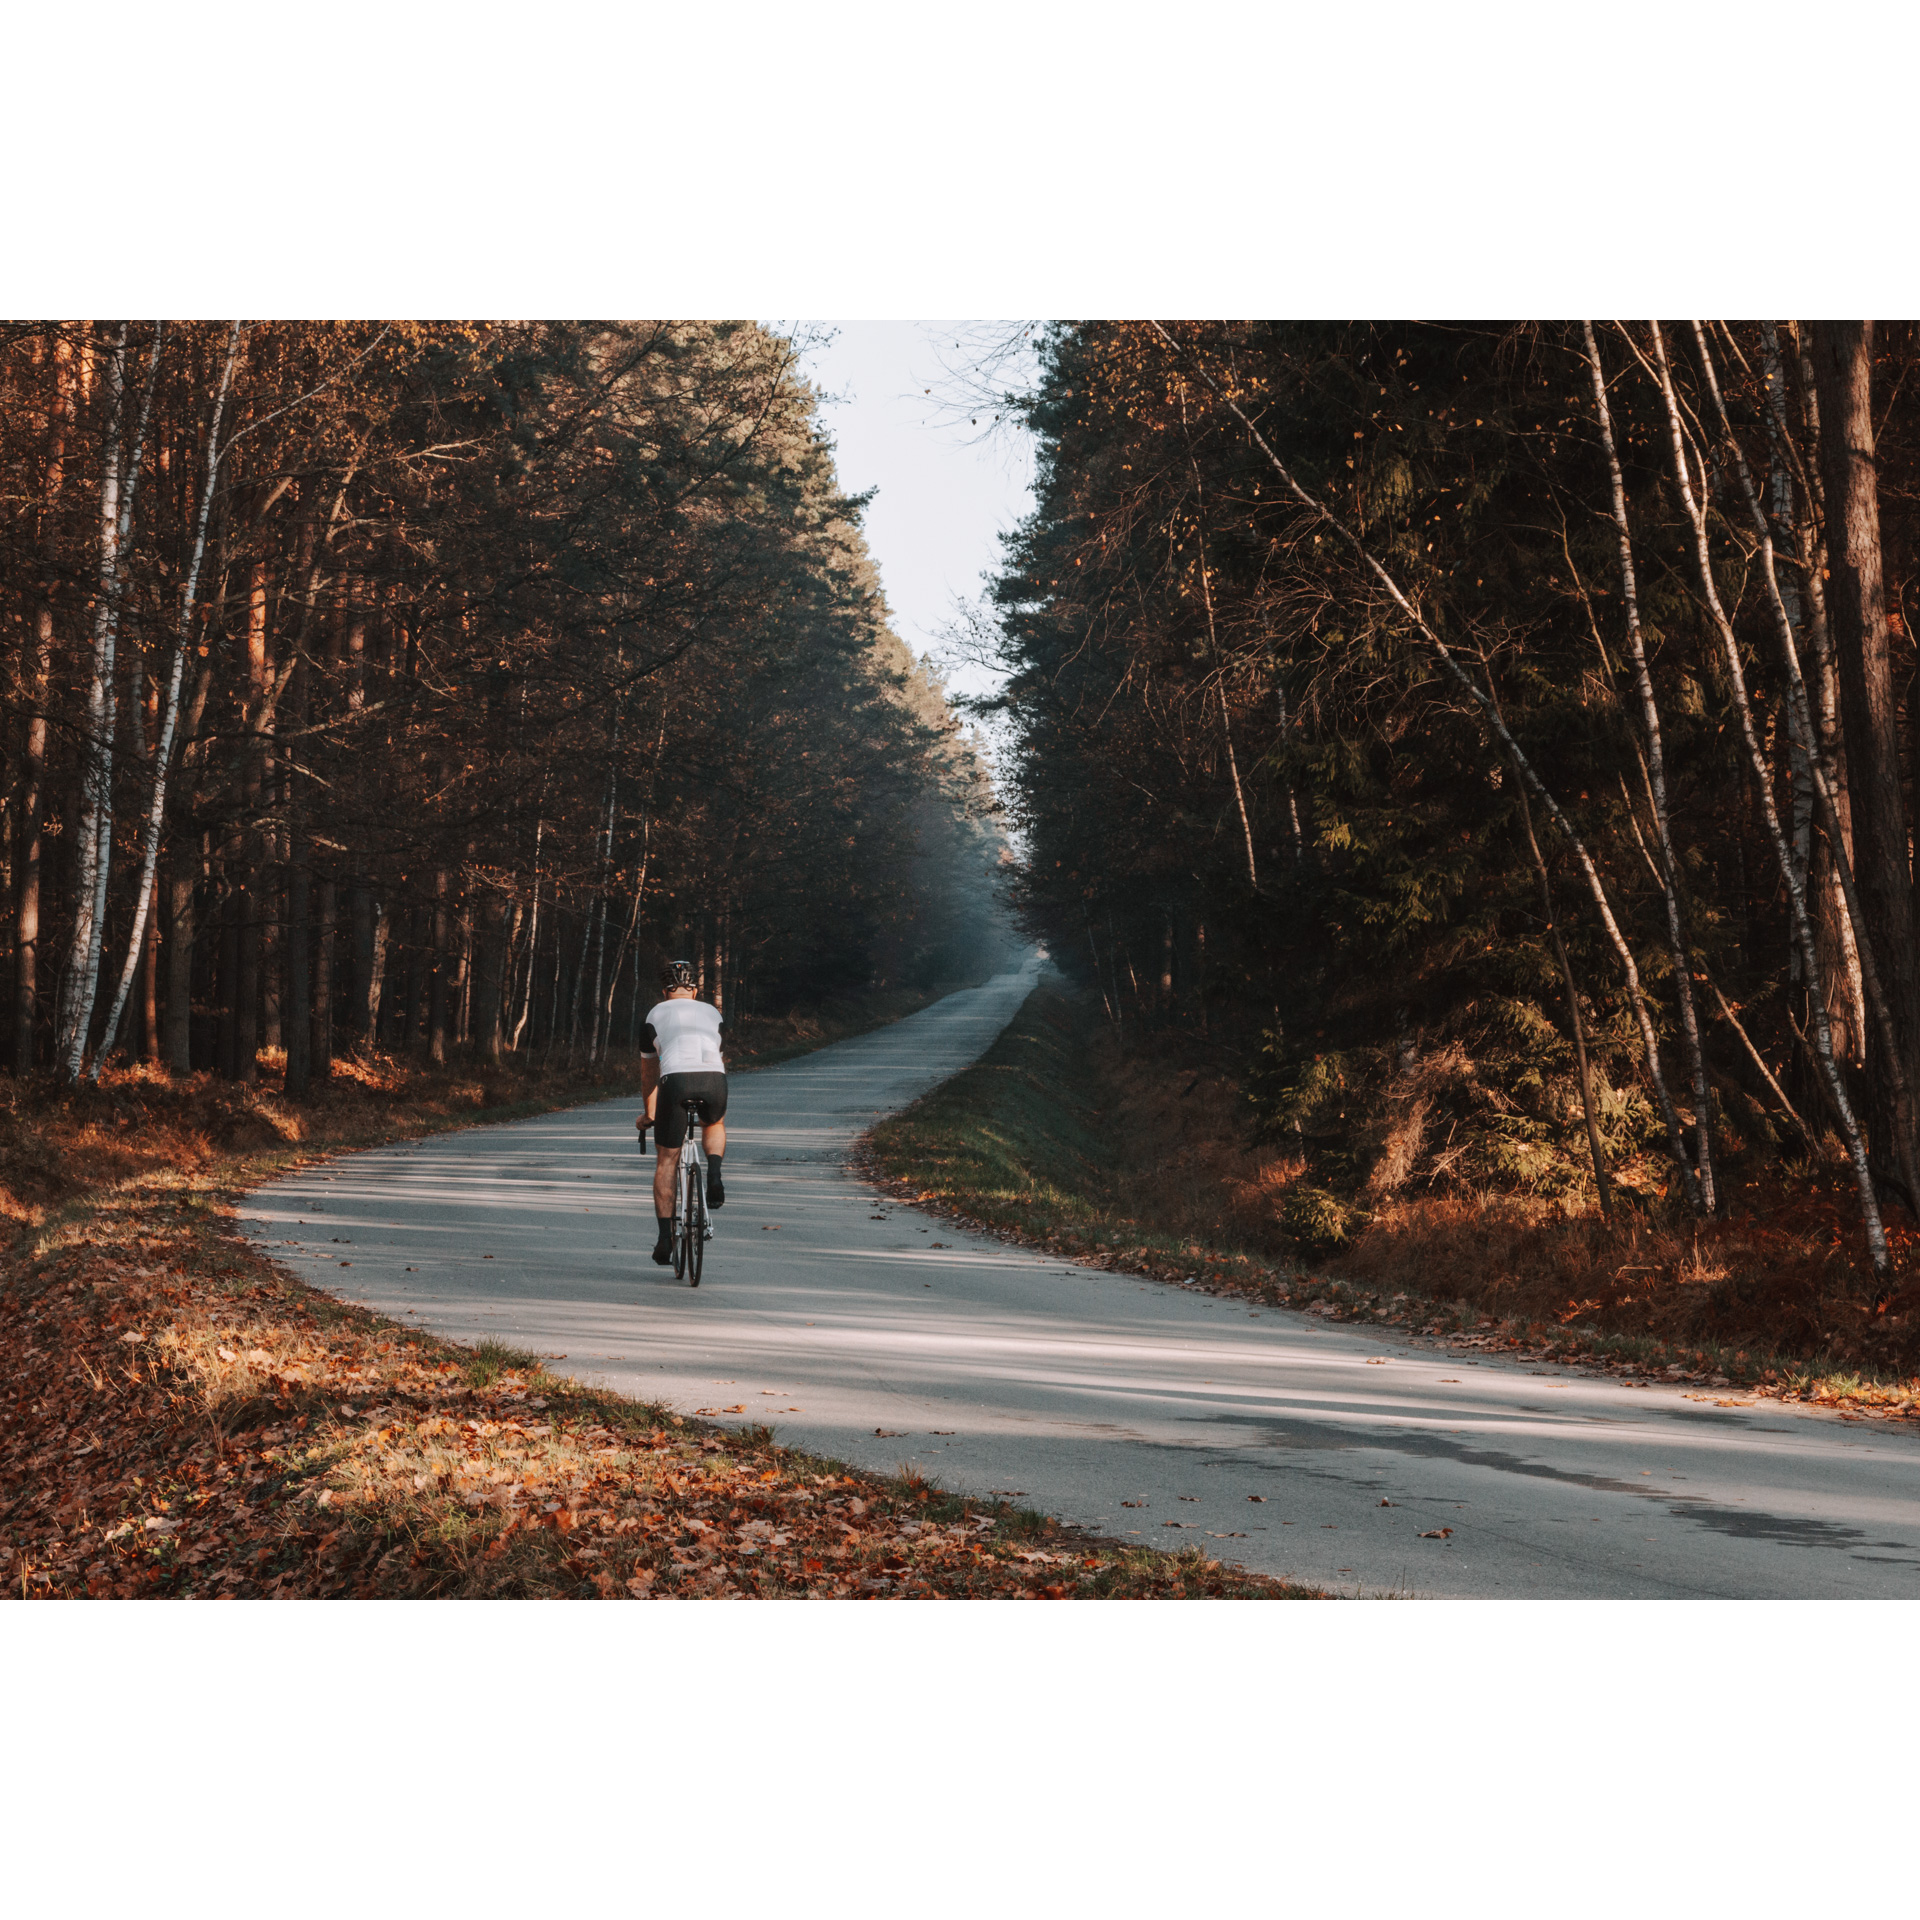 A cyclist in a black and white outfit riding an asphalt road through the autumn forest